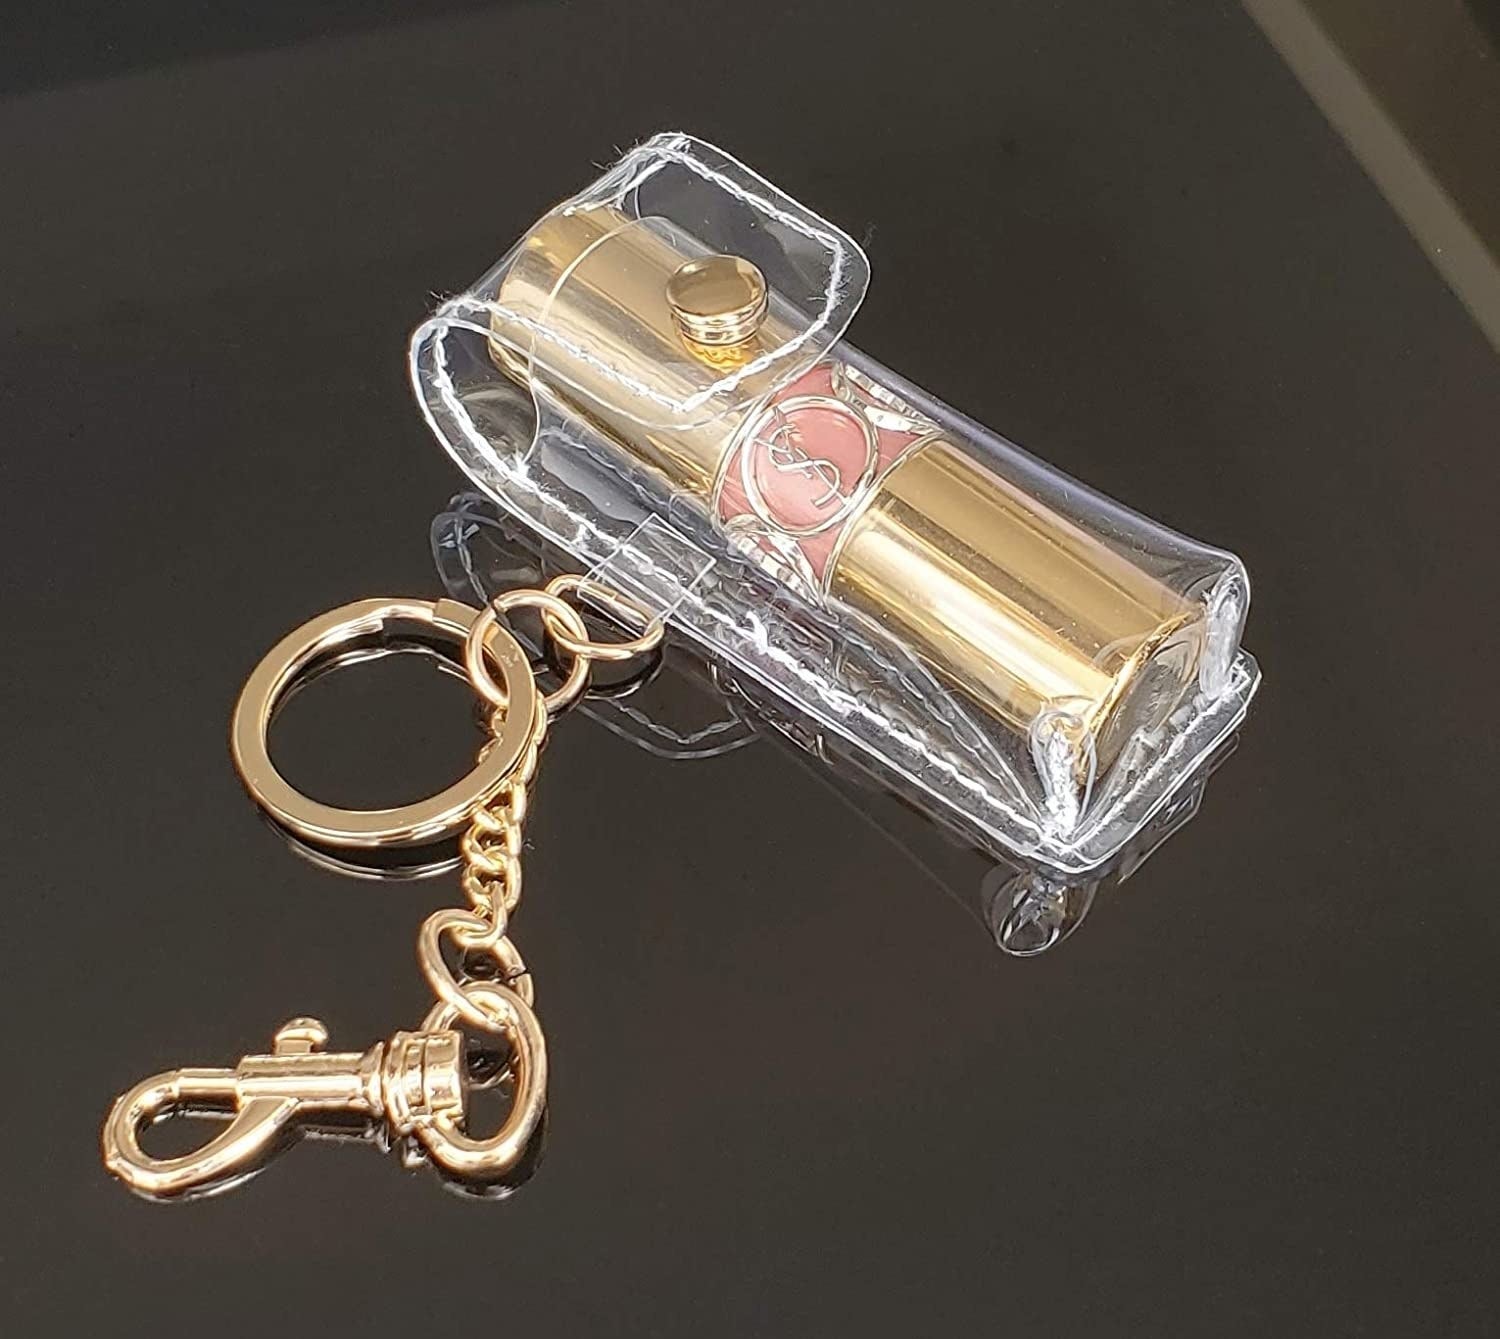 The lipstick holder with a tube of lipstick inside on a plain background